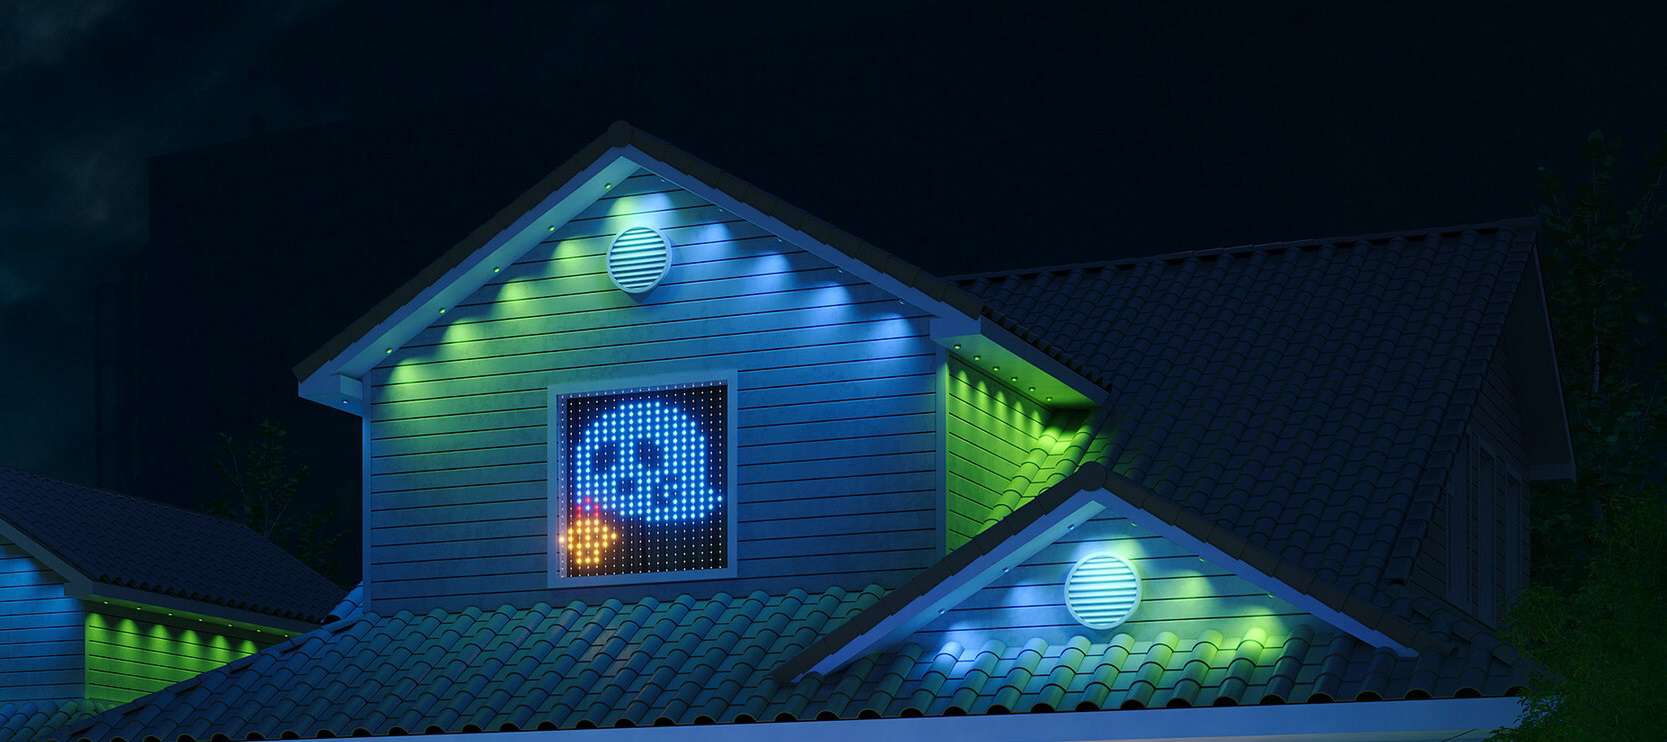 Govee Permanent Lights Pro decorating a home for Halloween